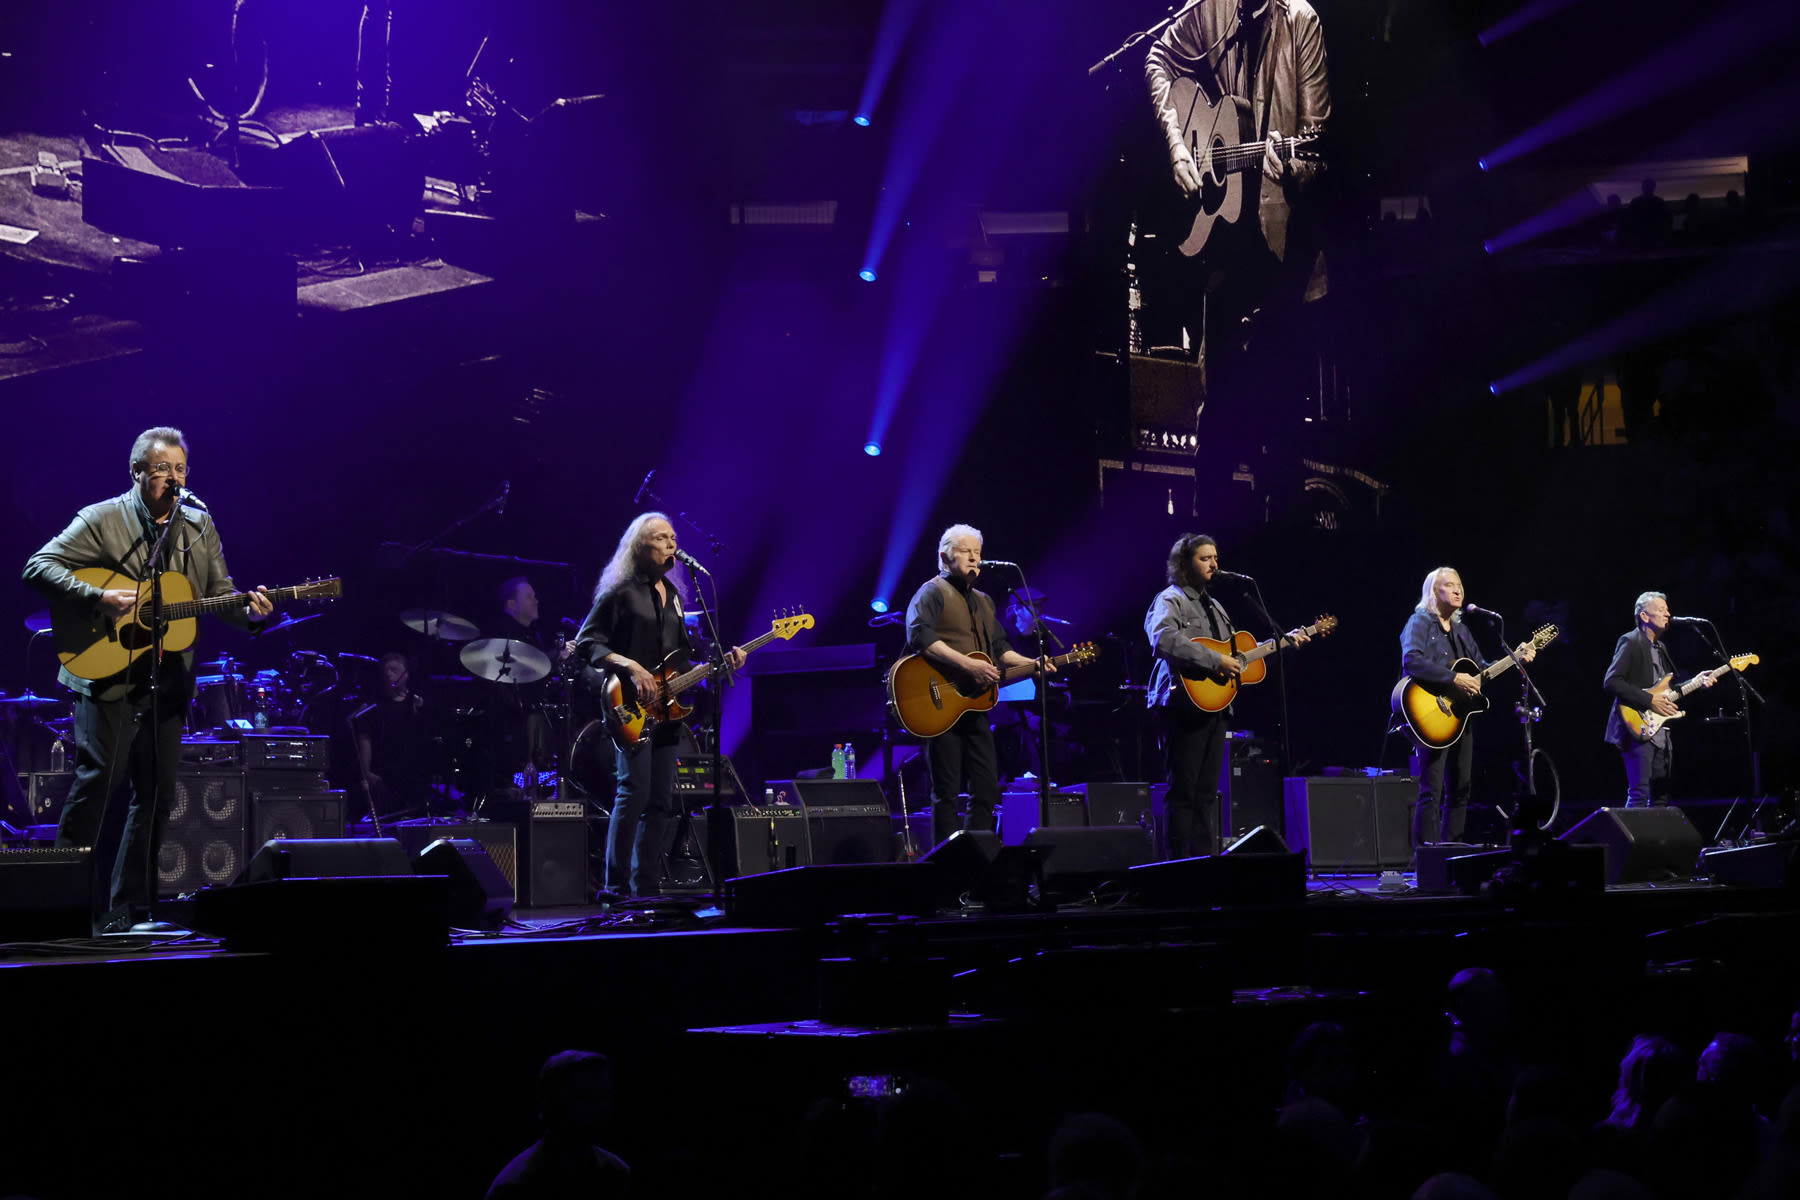 The Eagles’ Sphere Residency: Here’s Where You Can Get Tickets for the Las Vegas Shows